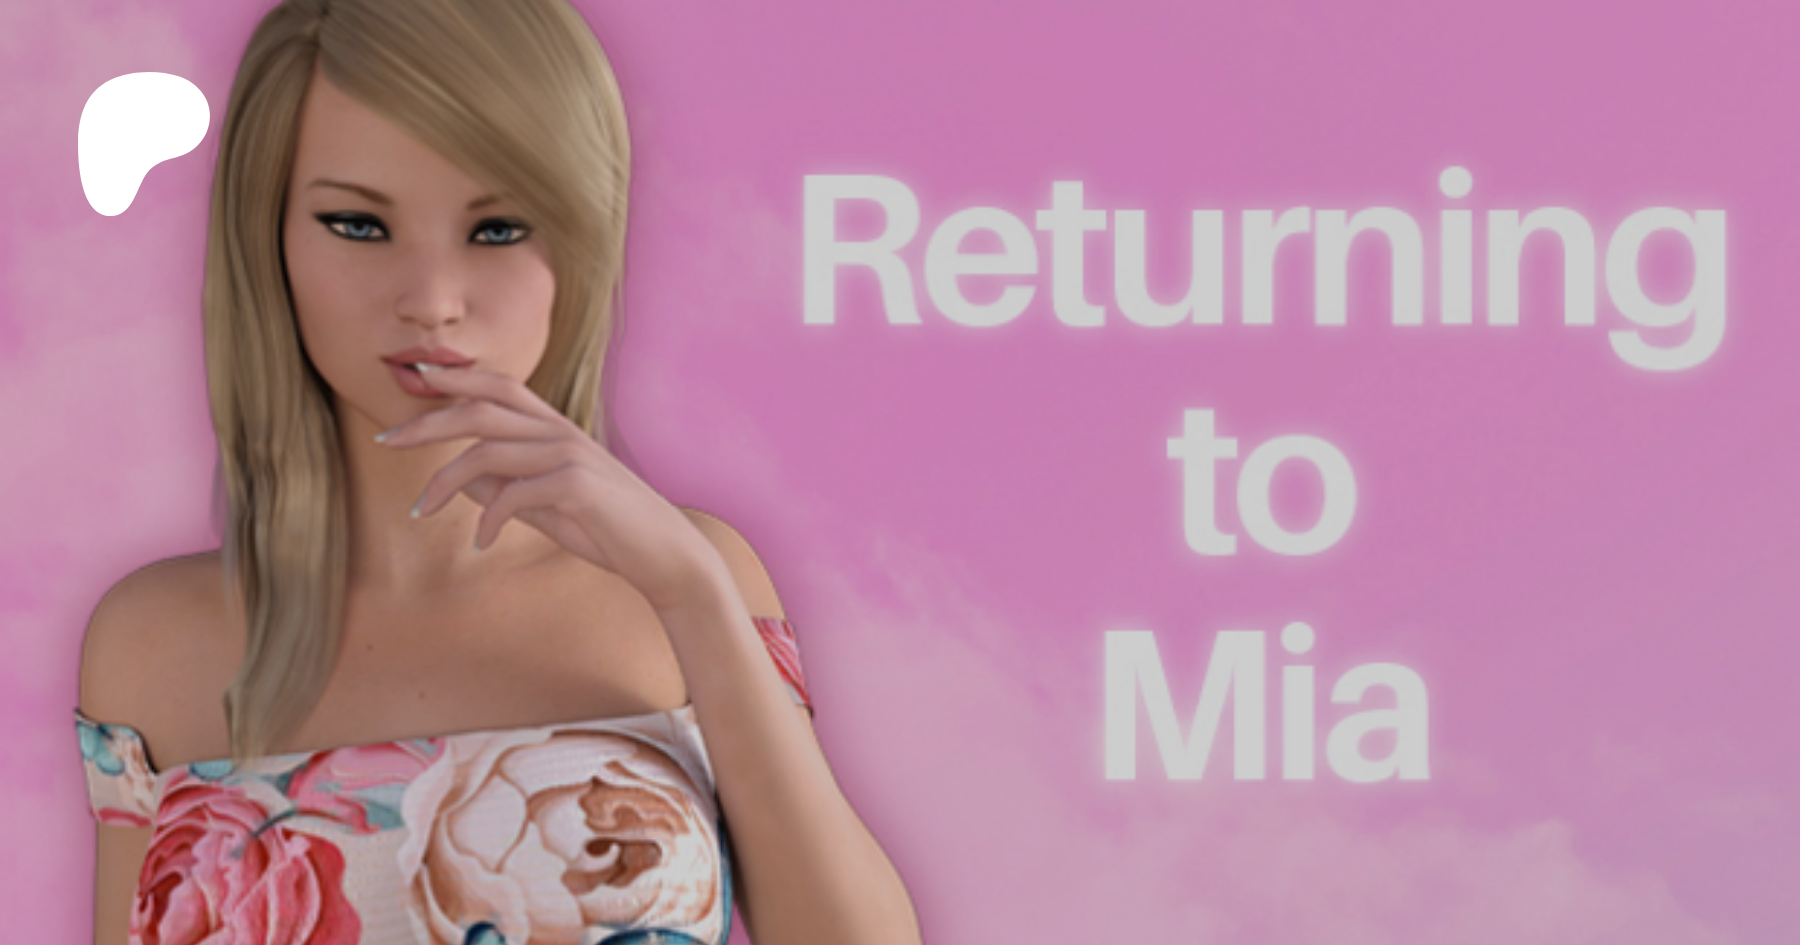 Summer with Mia 2 is now called Returning to Mia | Patreon